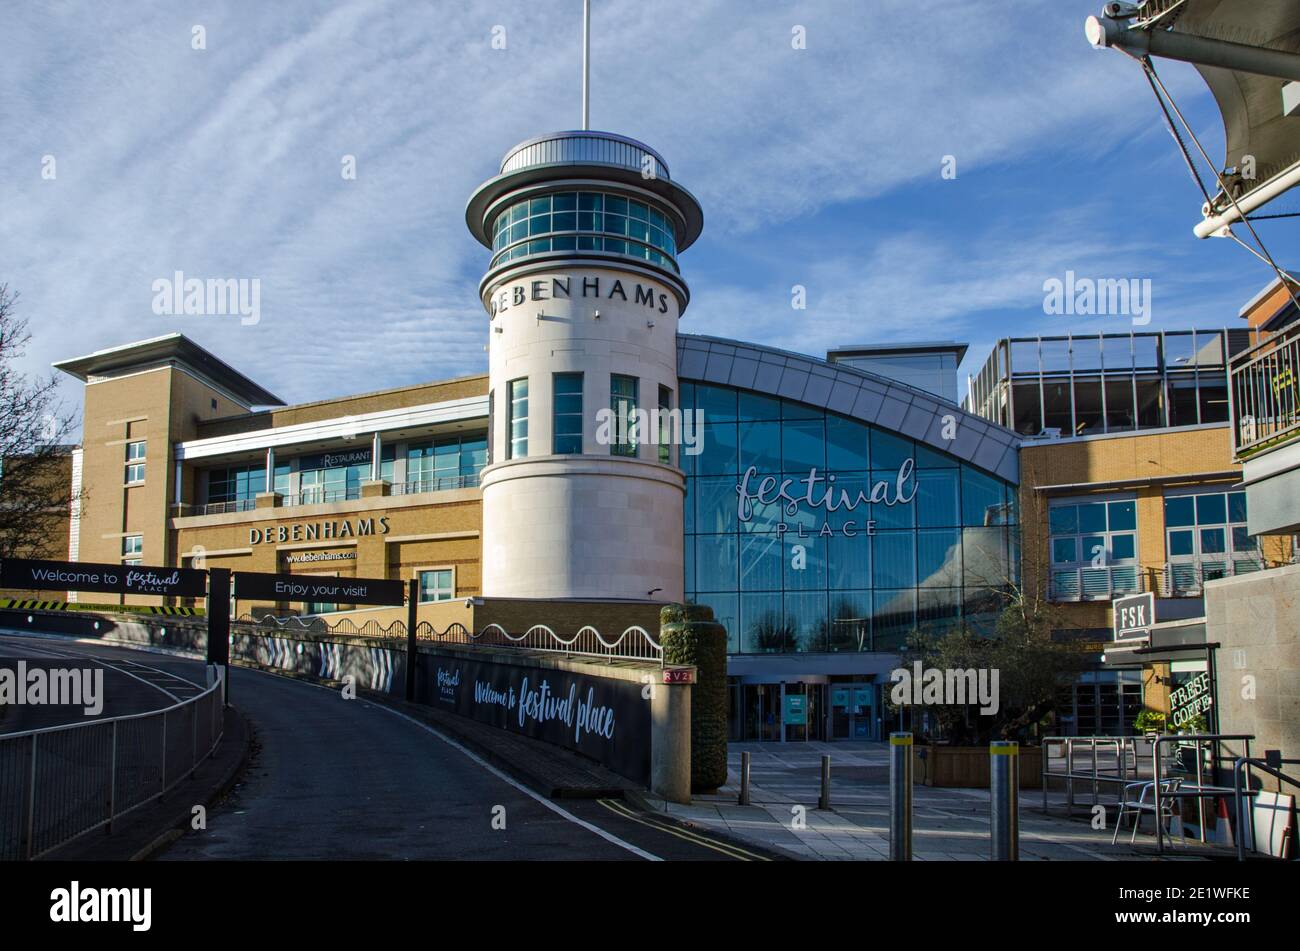 Basingstoke, UK - December 25, 2020: Entrance to the large Festival Place shopping centre in the middle of Basingstoke, Hampshire on a sunny winter mo Stock Photo